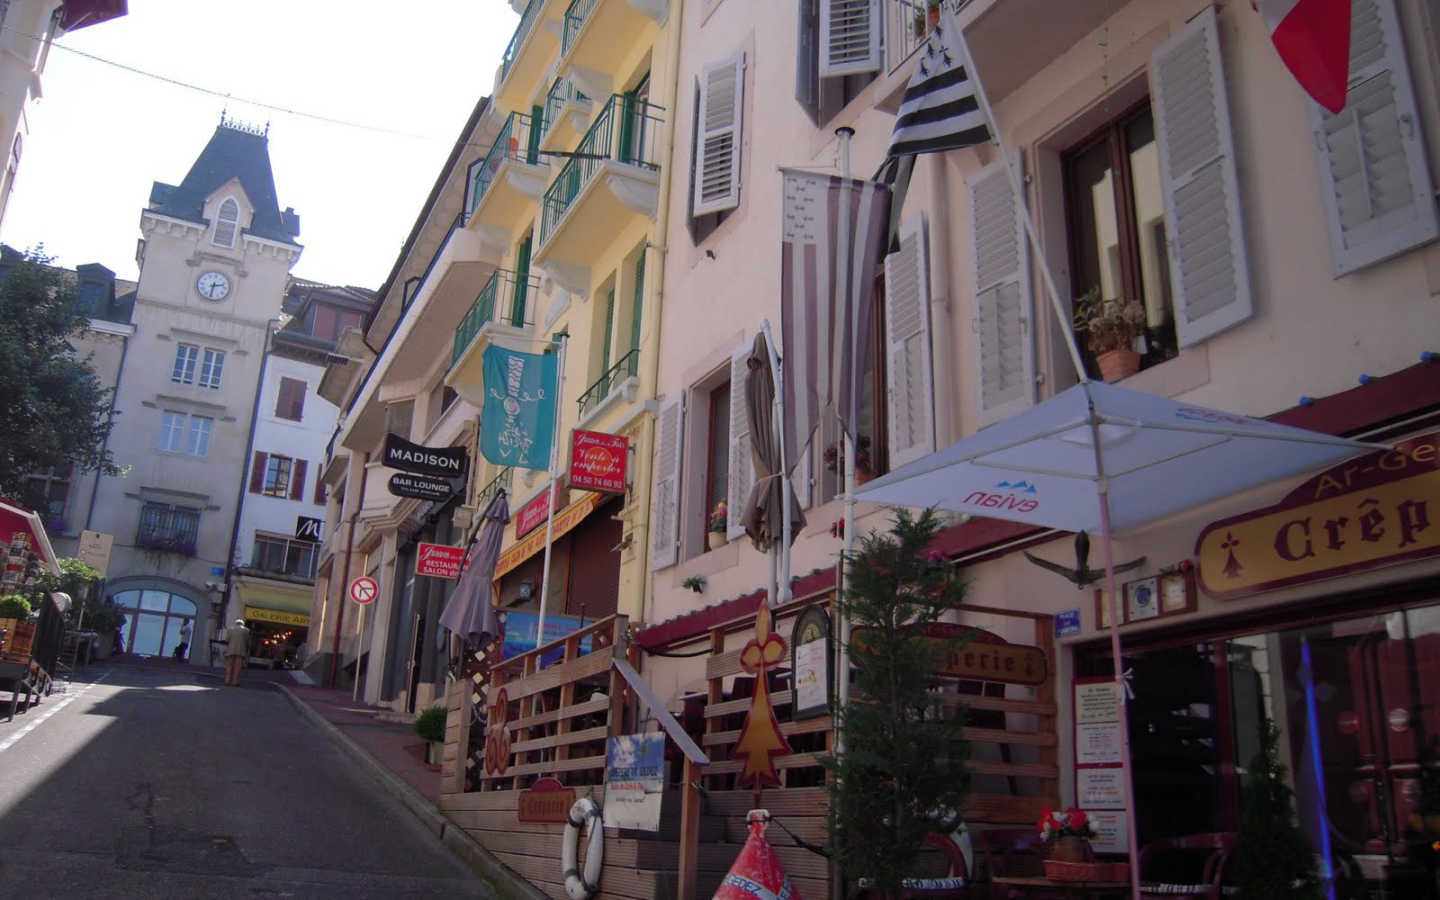 City street in the resort of Evian, France